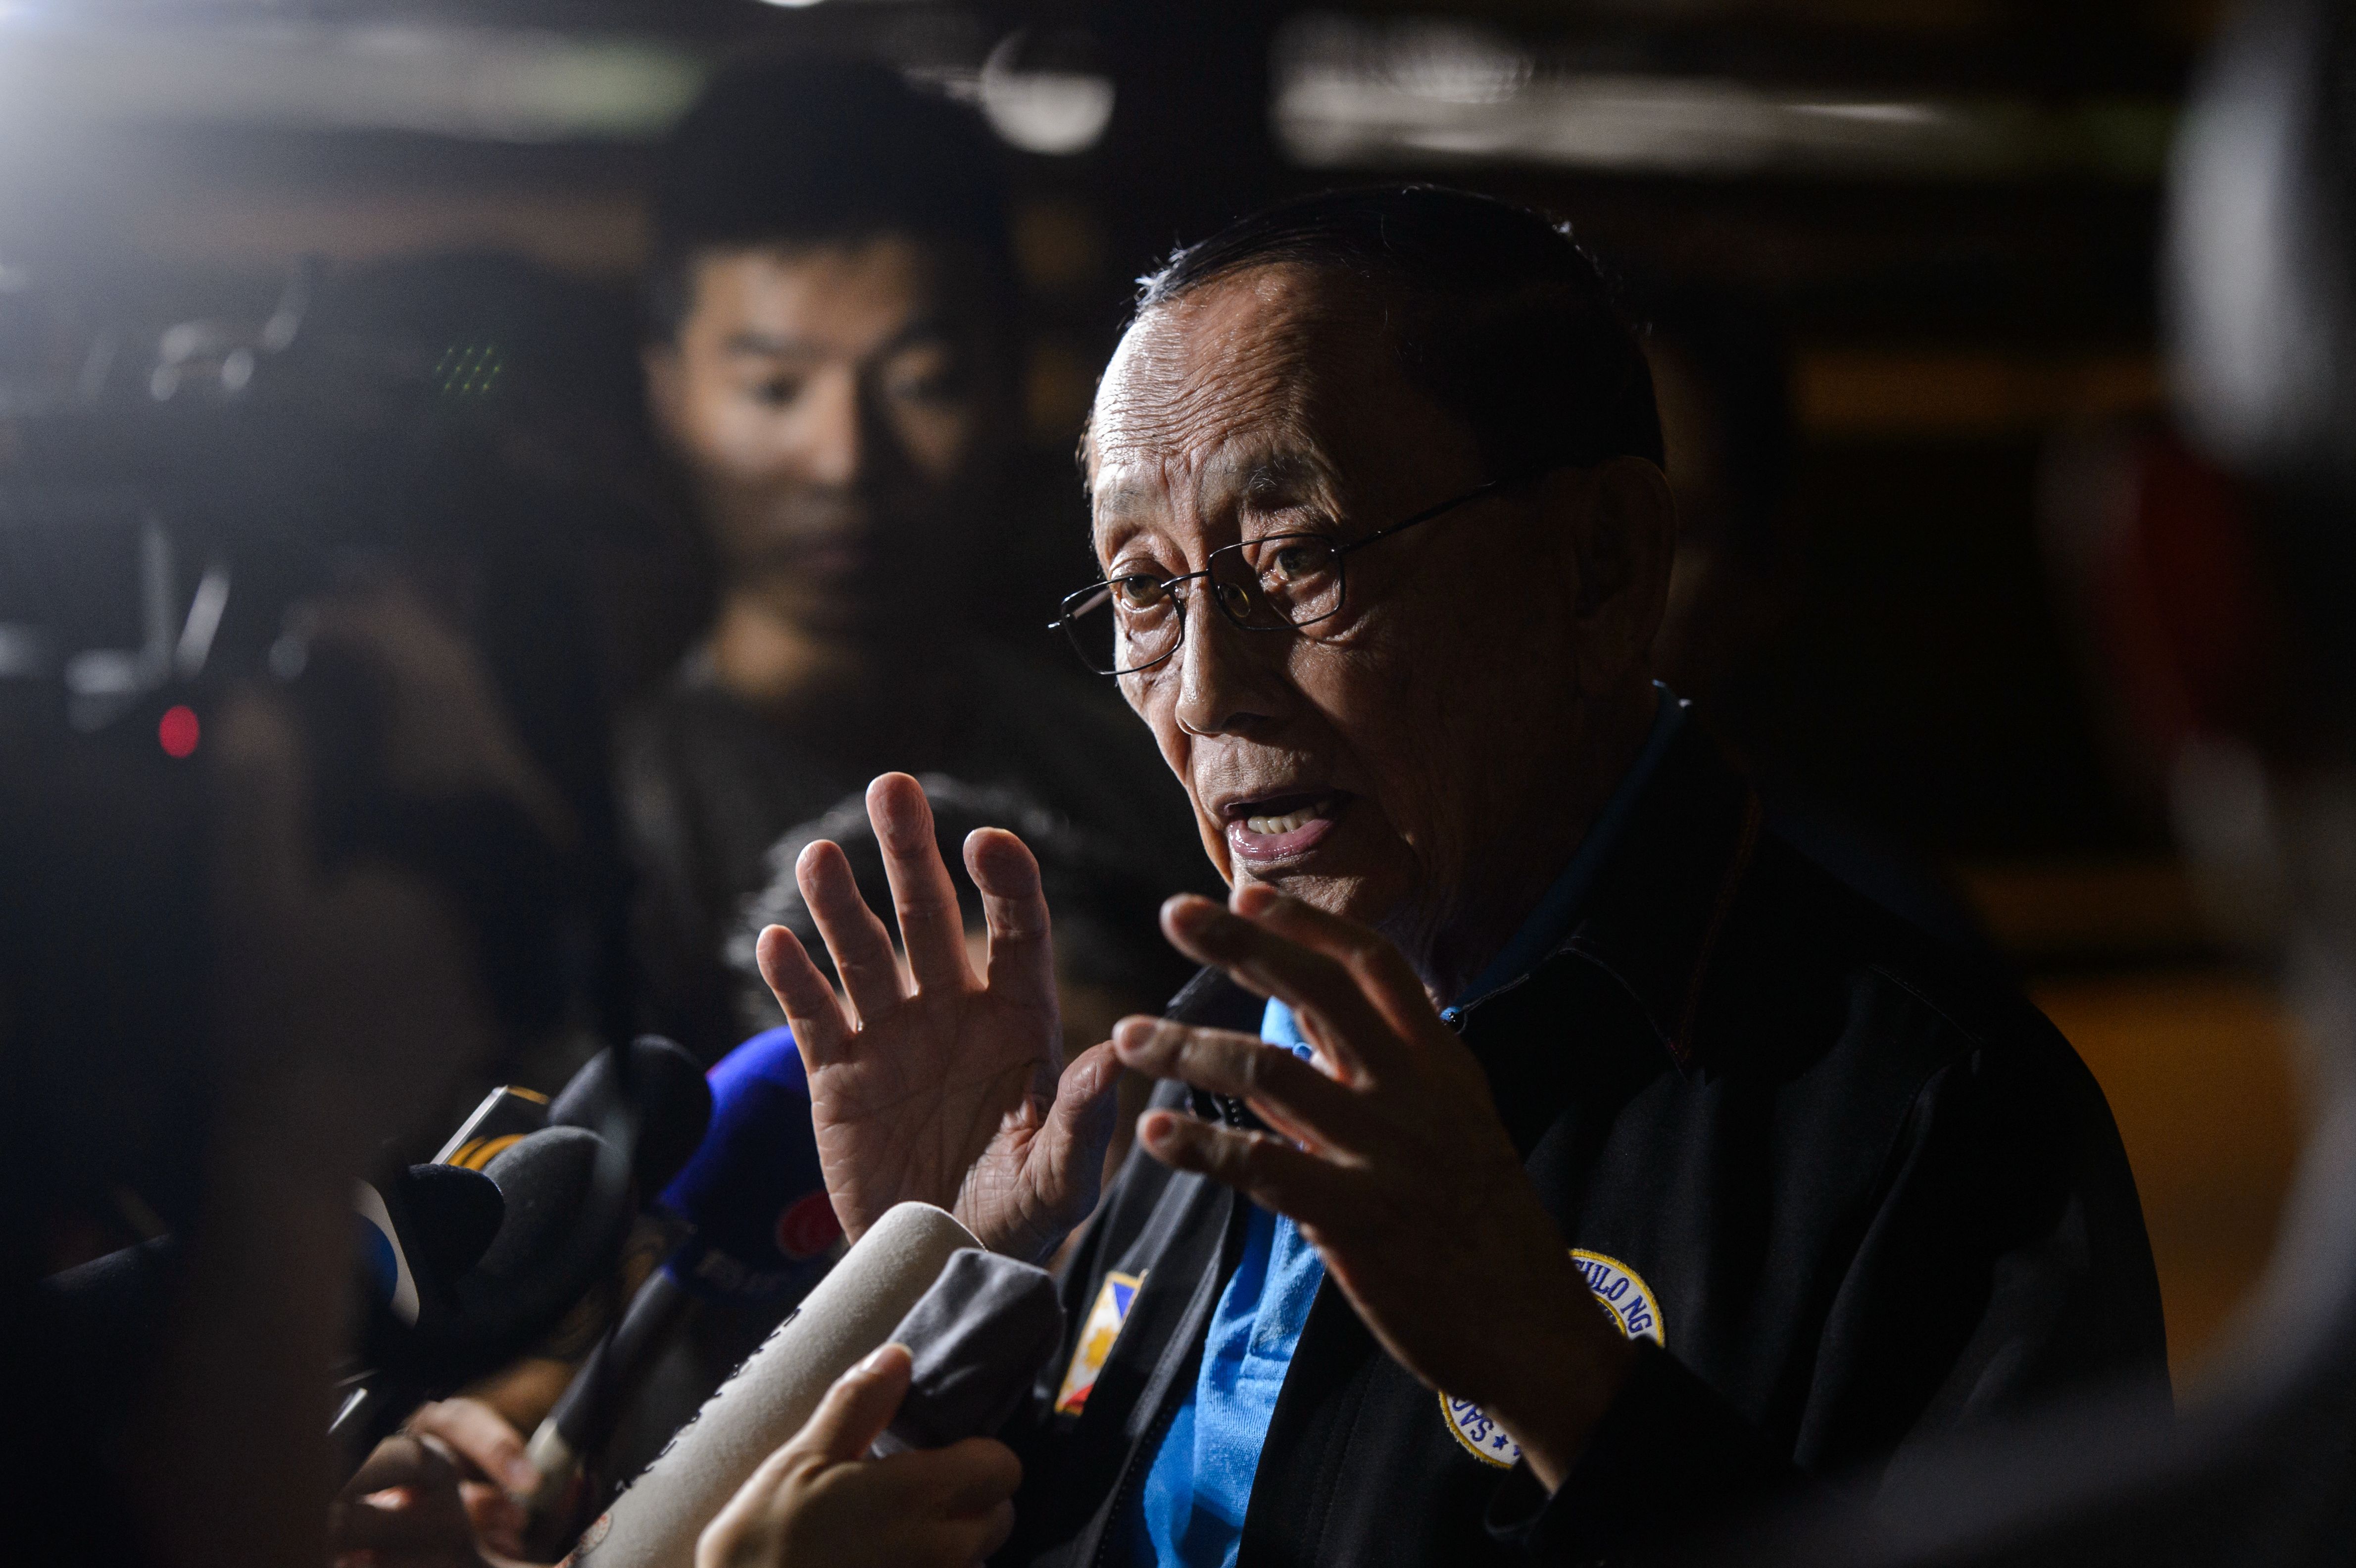 Ex-Philippine President Fidel Ramos, center, whom President Rodrigo Duterte named as his envoy for talks with Beijing, speaks to the press shortly after his arrival at Hong Kong International Airport in Hong Kong on Aug. 8, 2016 (Anthony Wallace—AFP/Getty Images)